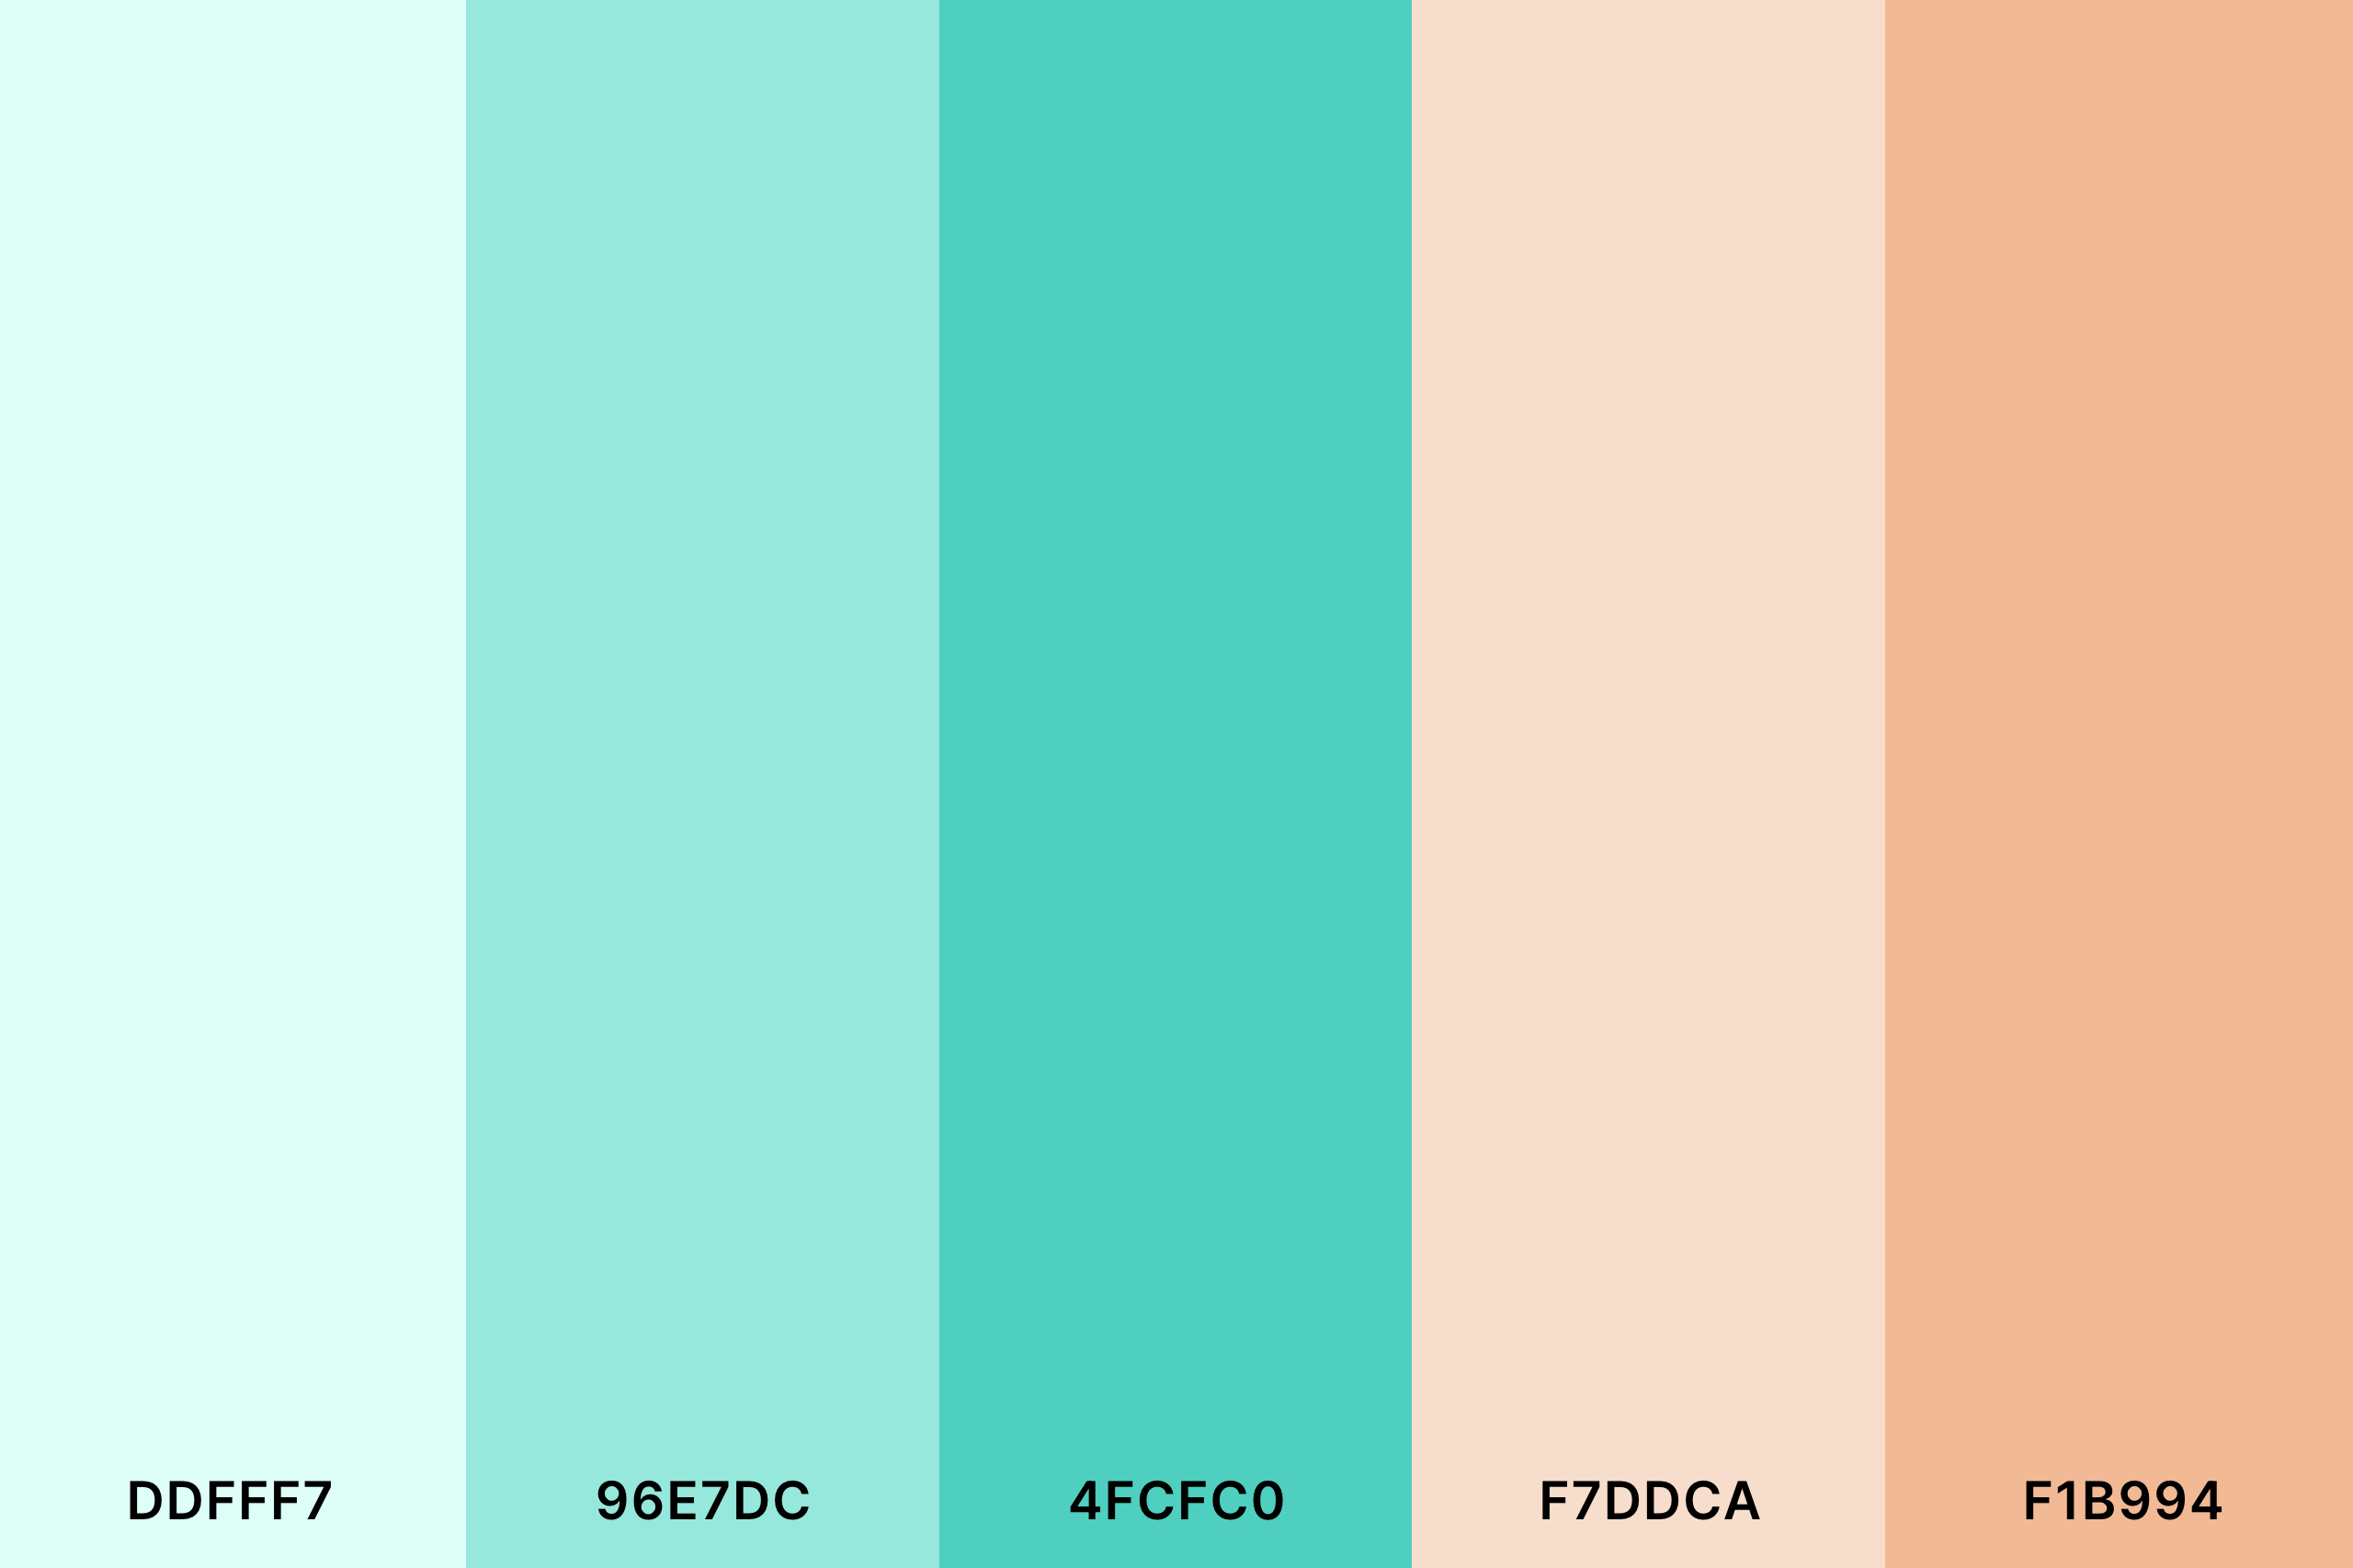 Peach and Mint Color Palette with Mint Green (Hex #DDFFF7) + Tiffany Blue (Hex #96E7DC) + Turquoise (Hex #4FCFC0) + Champagne Pink (Hex #F7DDCA) + Peach (Hex #F1B994) Color Palette with Hex Codes